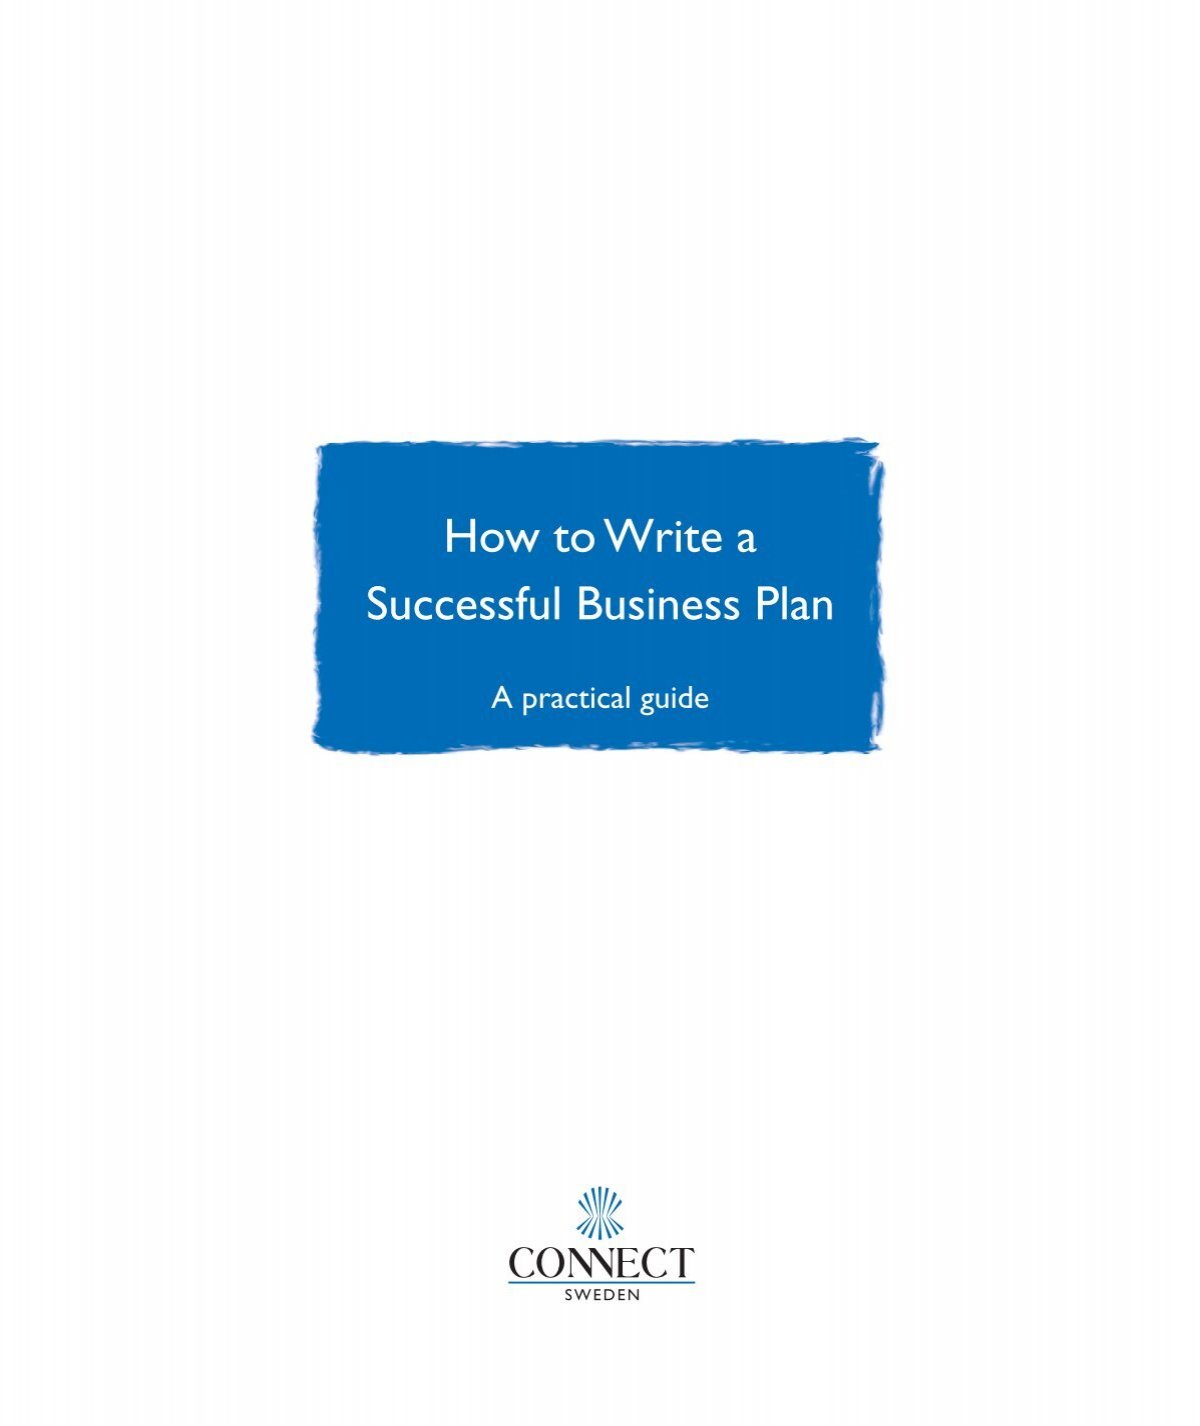 how to write a business plan book pdf download